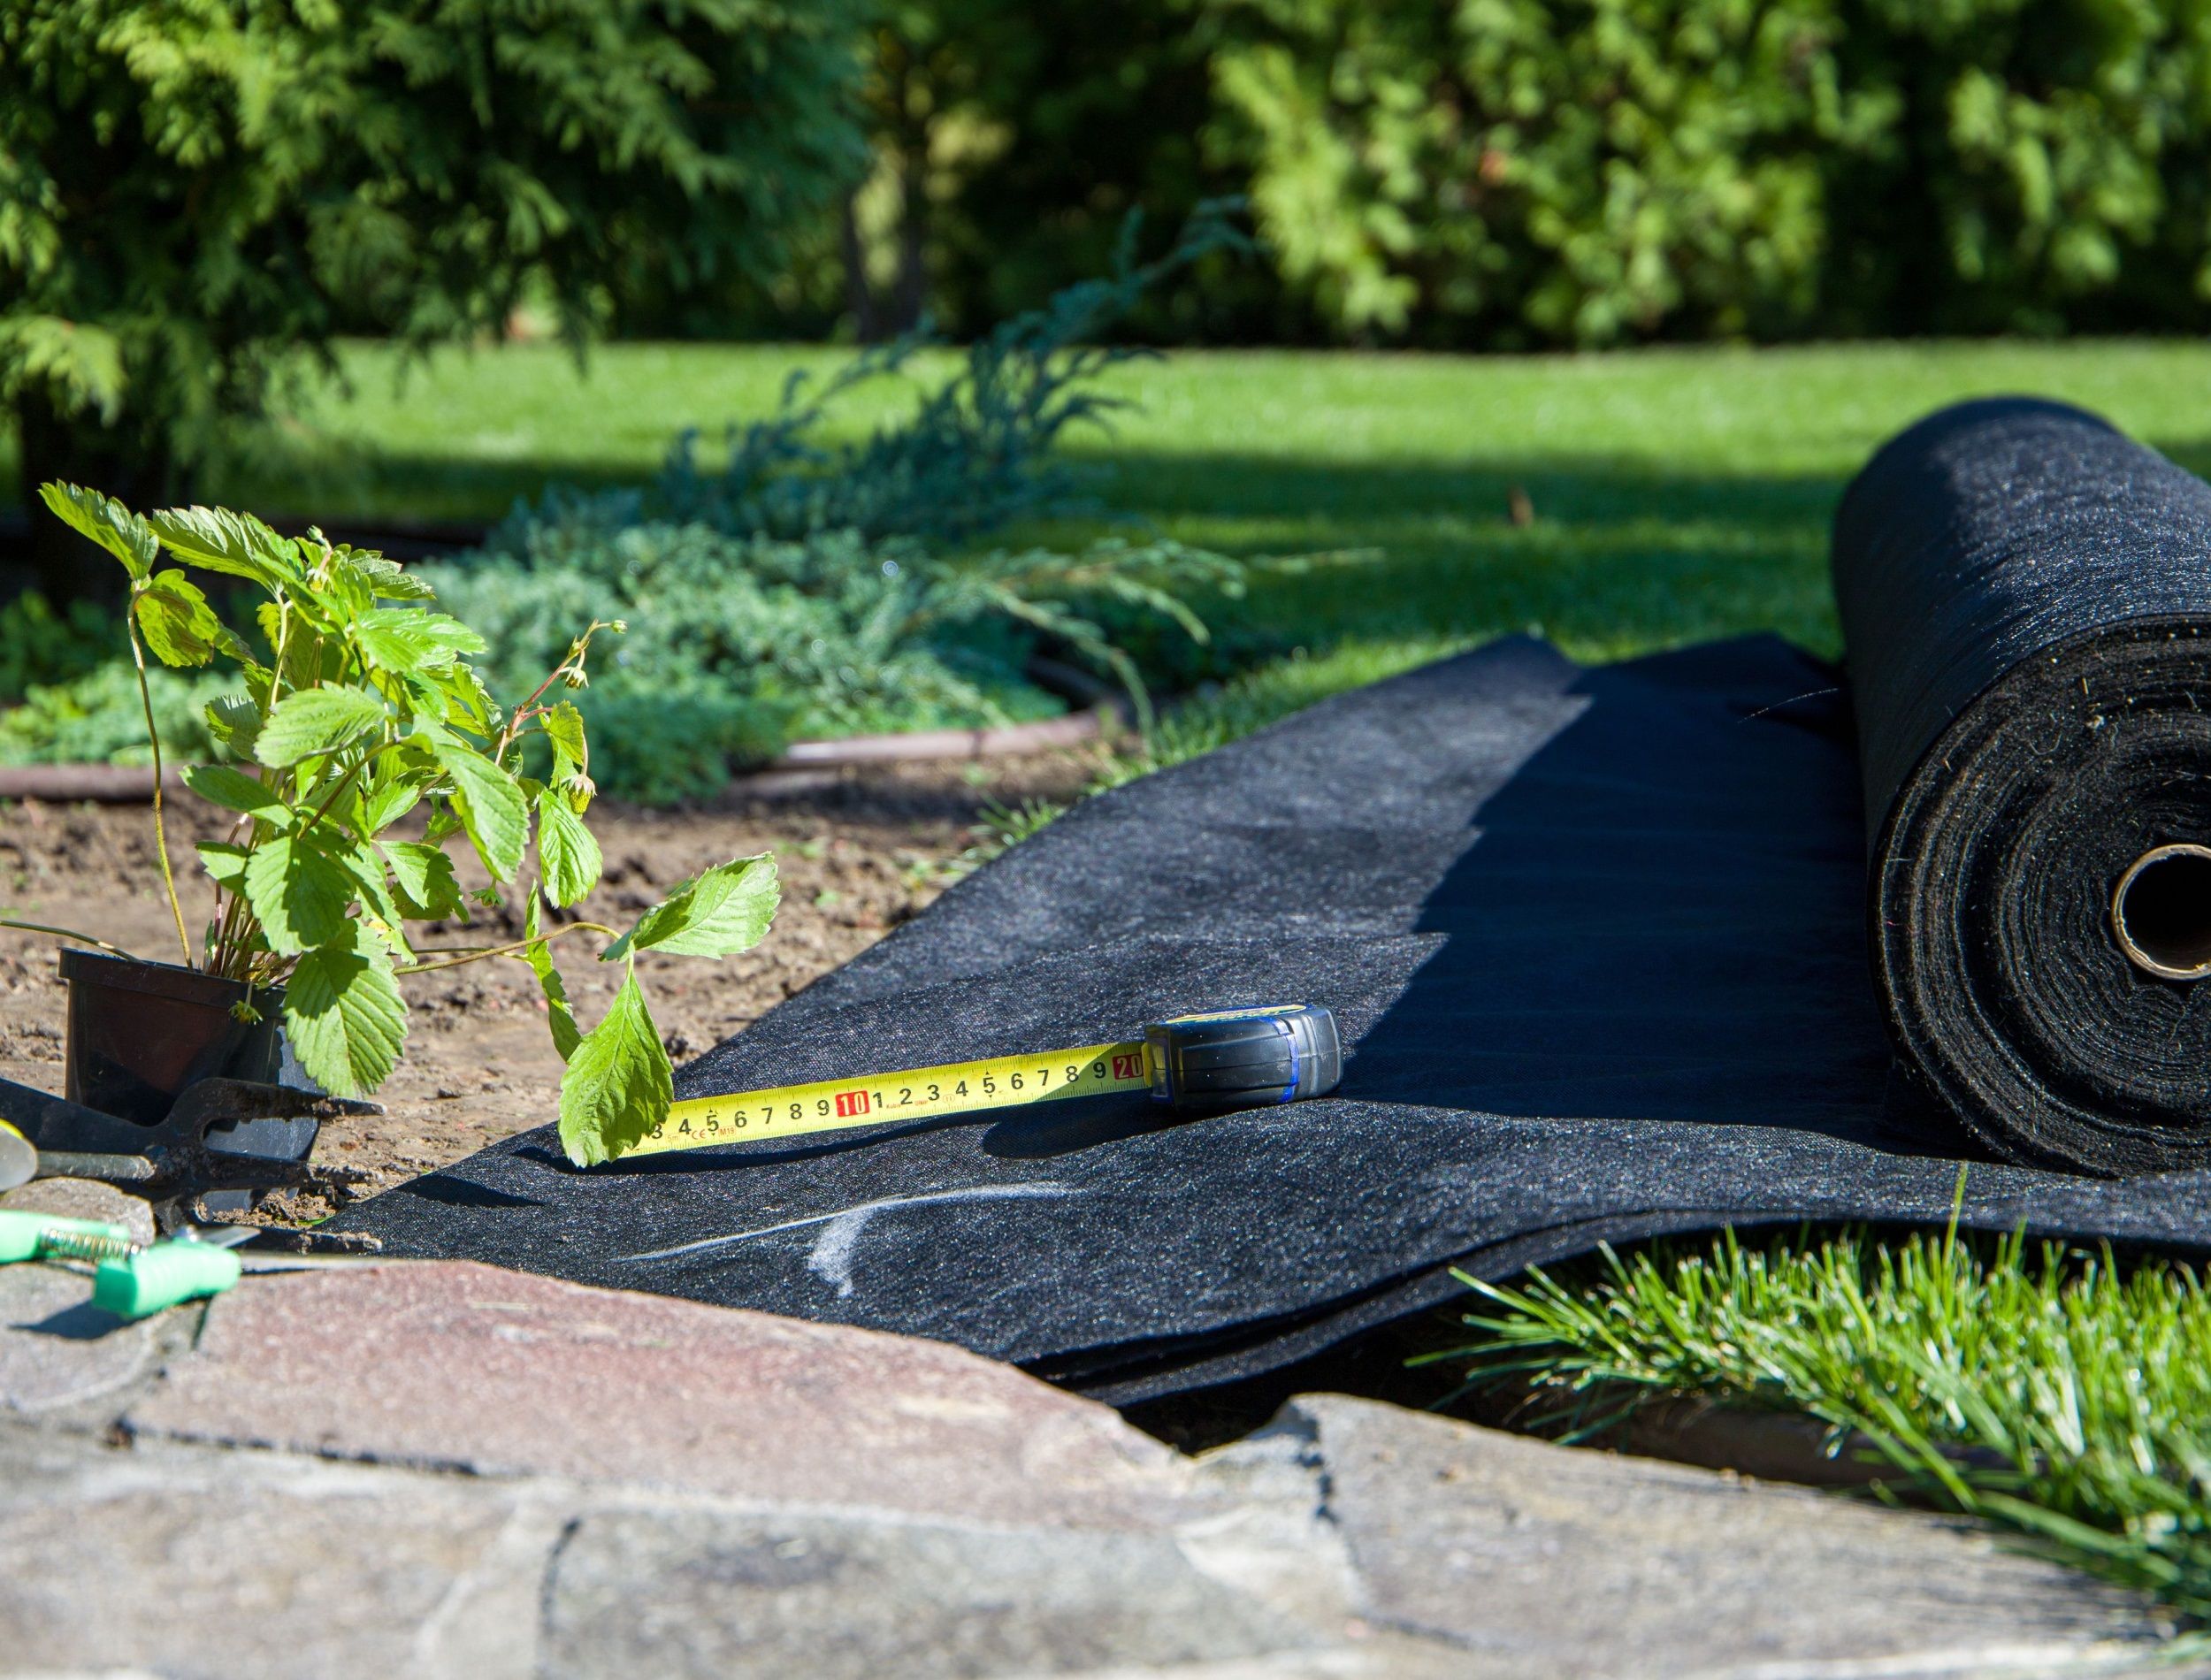 Strawberry bush in a pot, black geotextile in a roll, gardening tools. Selective focus.